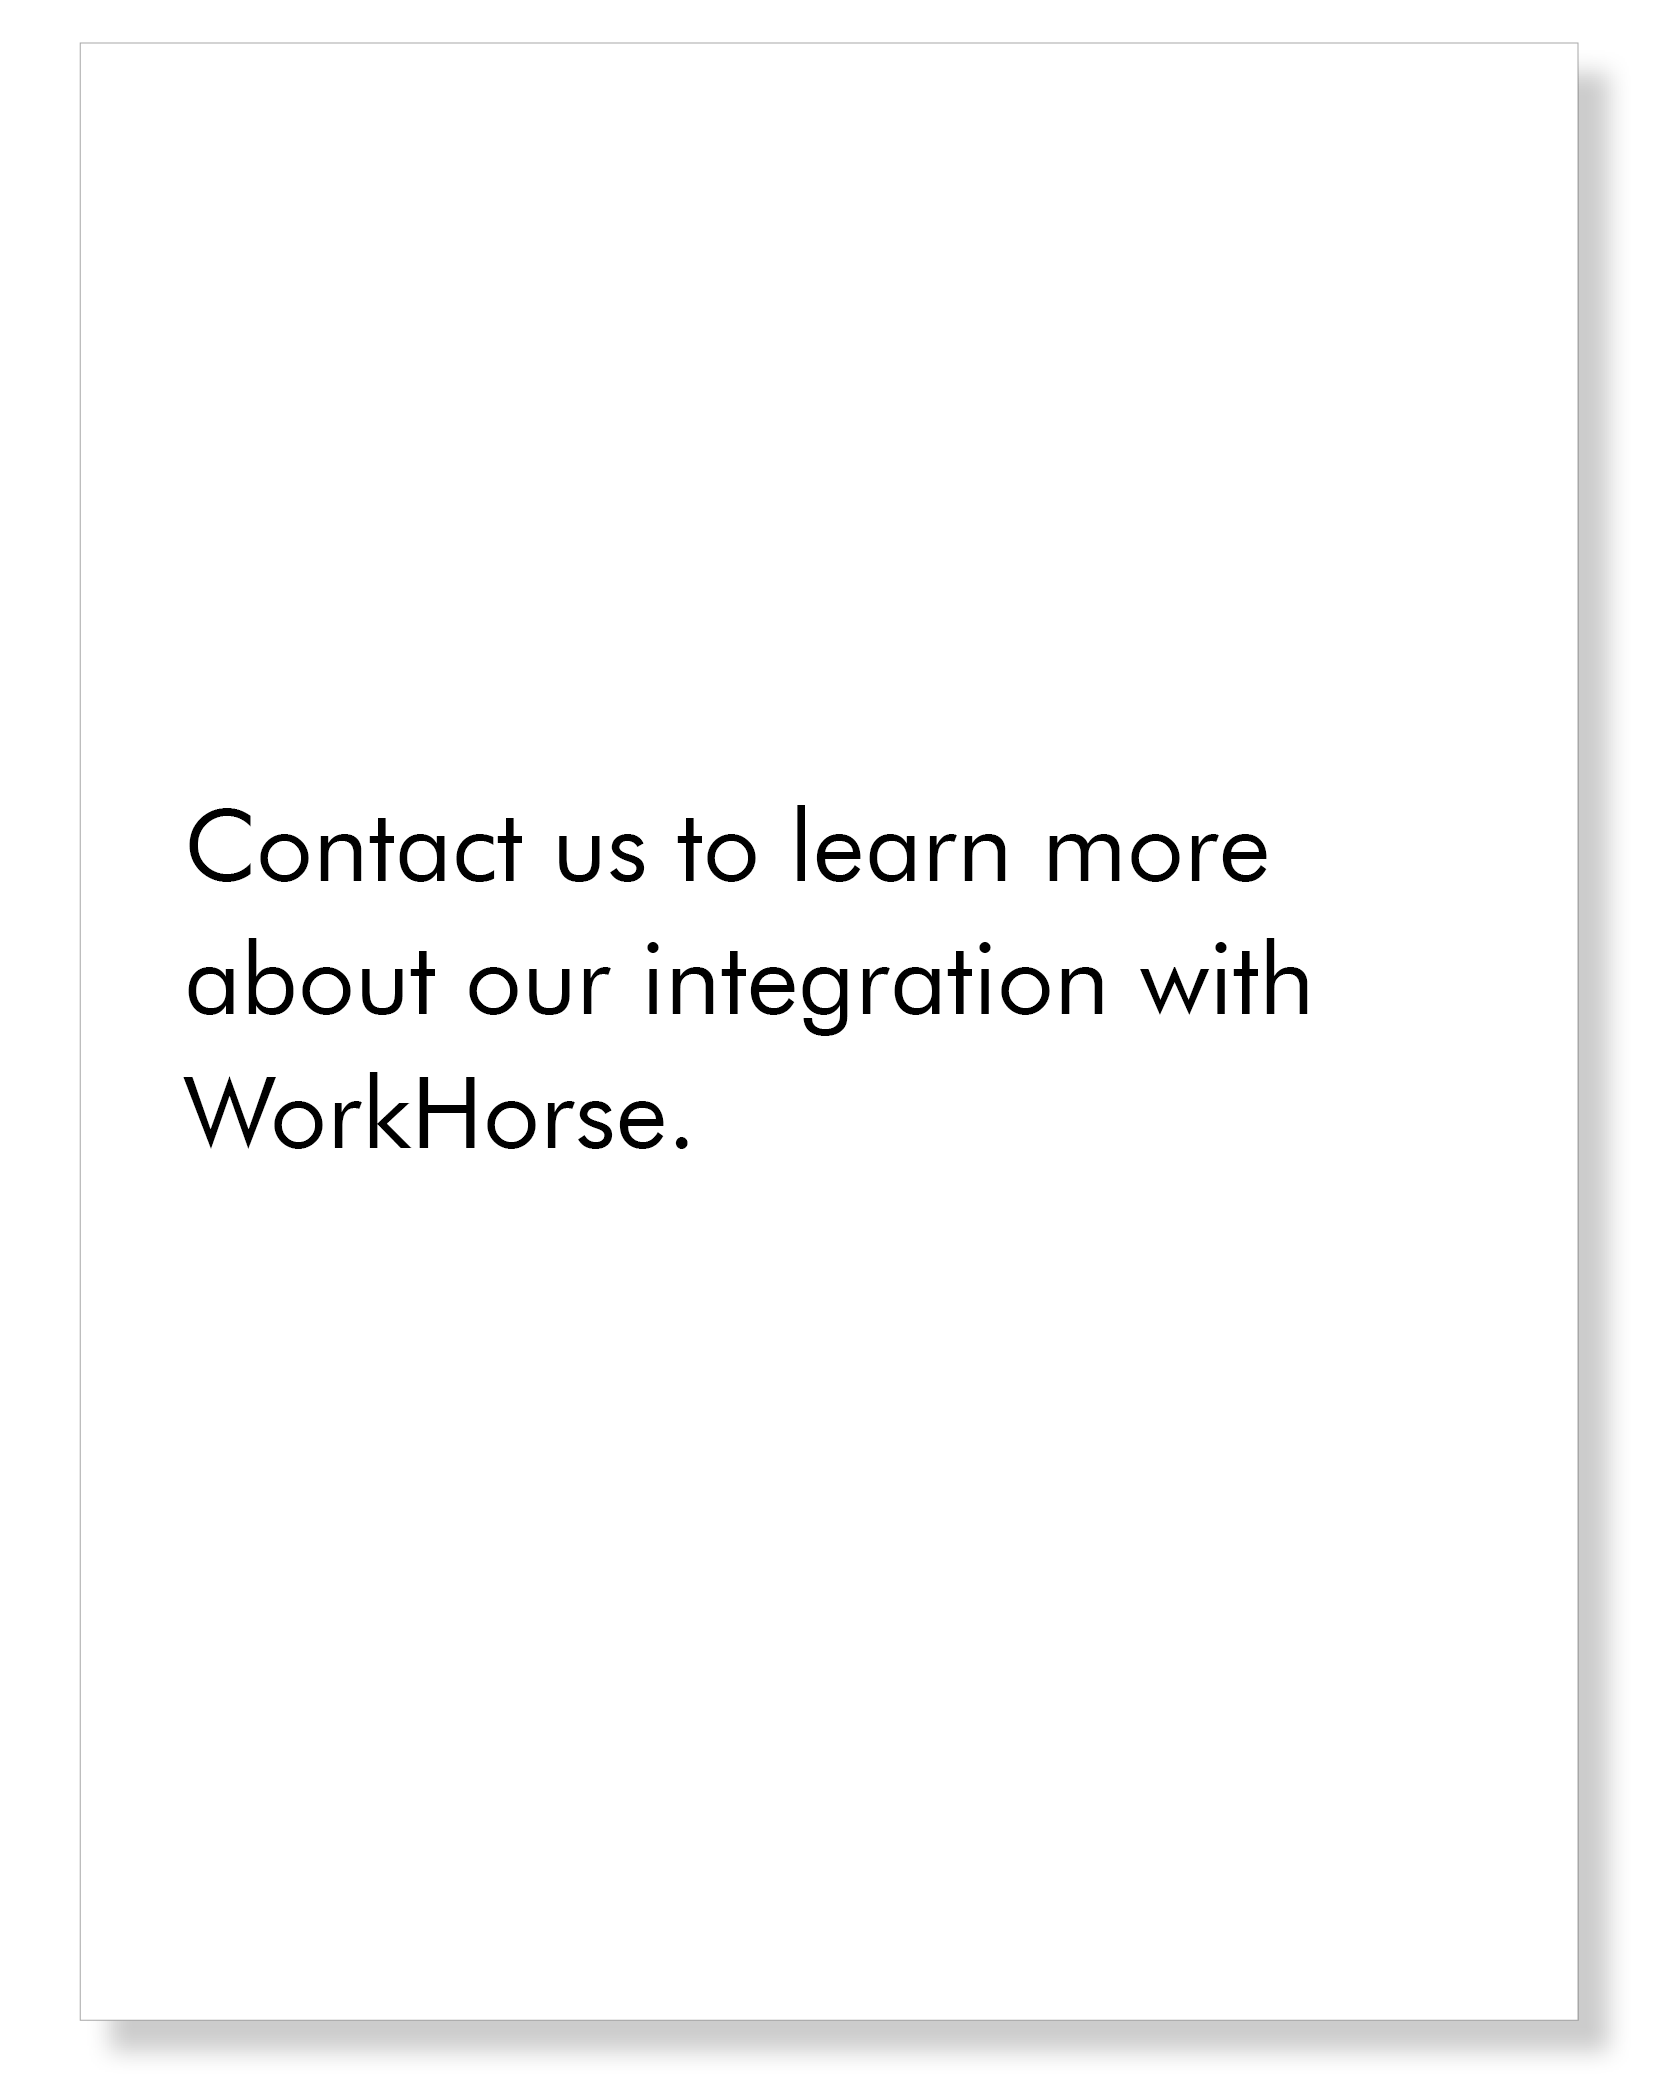 Contact us to learn more about our integration with WorkHorse.